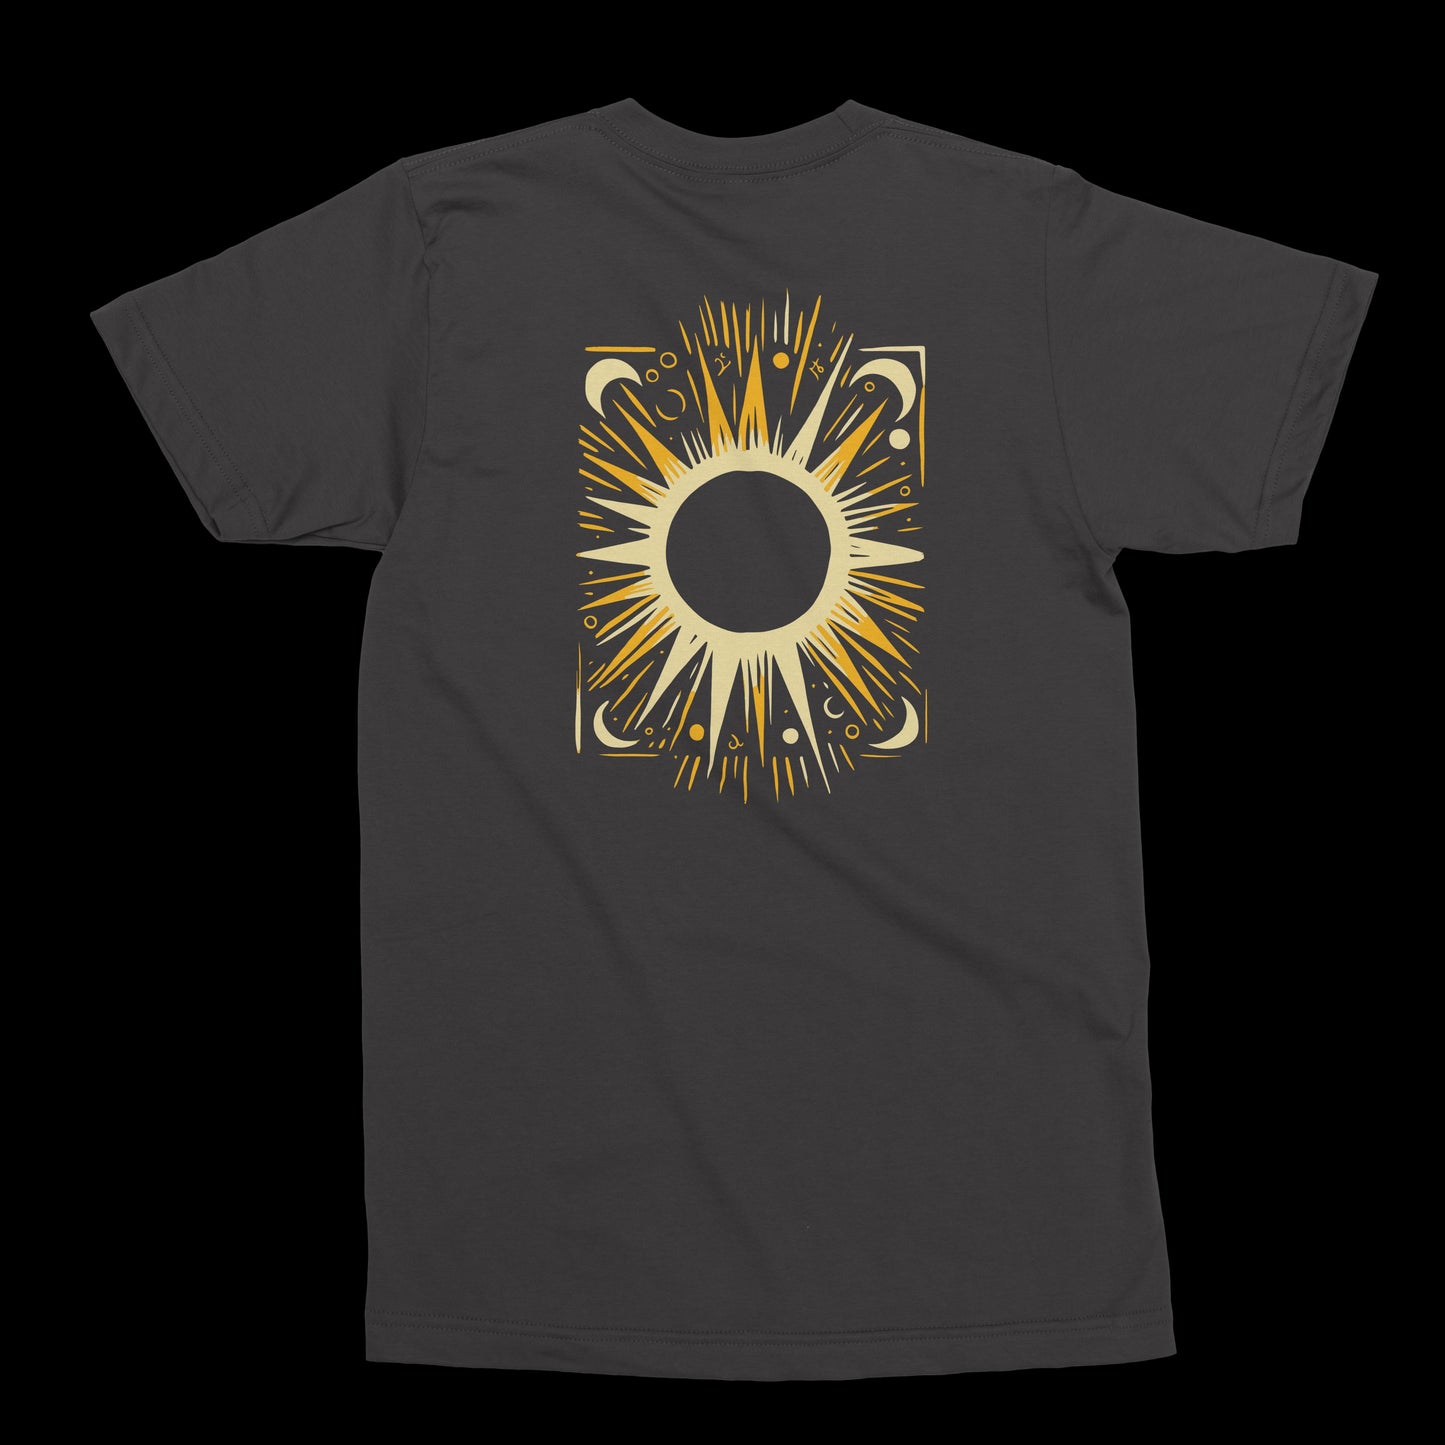 4.8.24 • total eclipse t-shirt